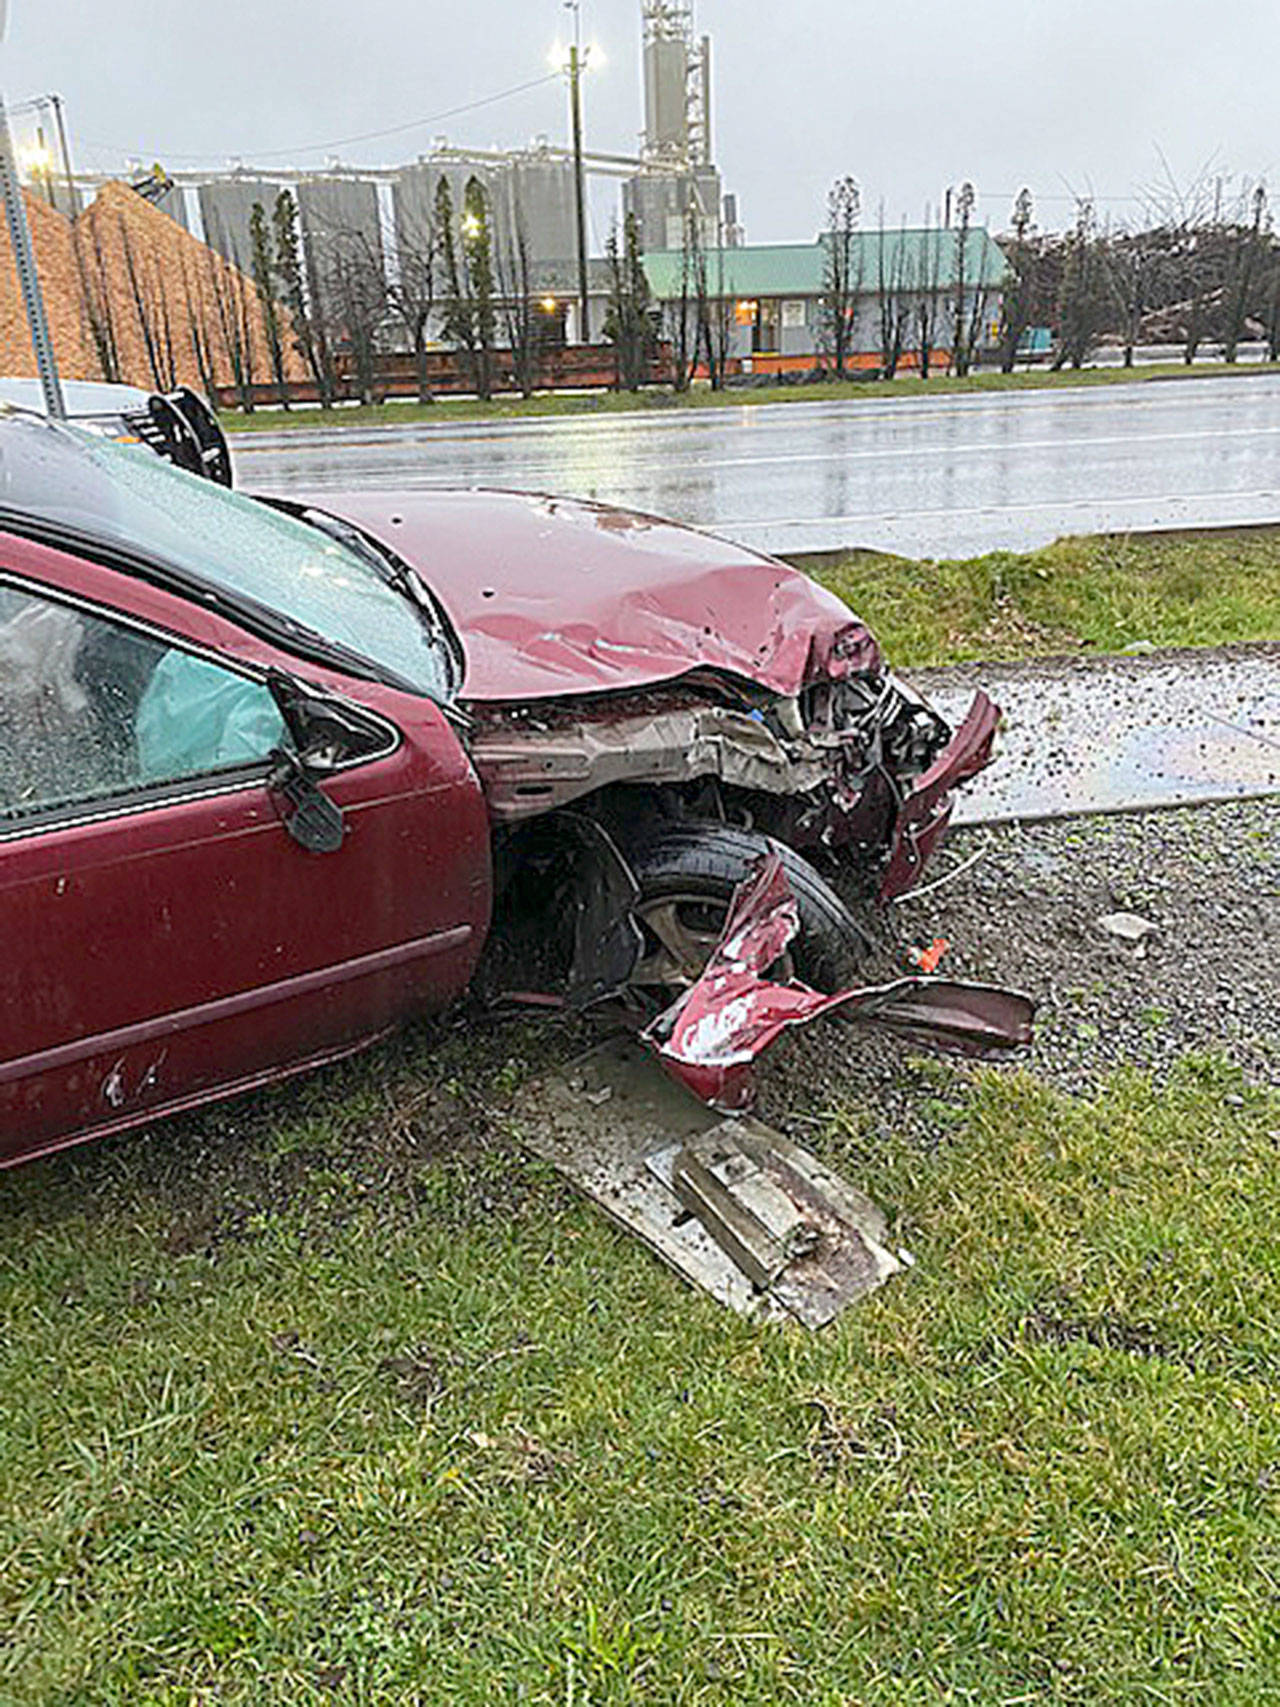 COURTESY HOQUIAM POLICE DEPARTMENT 
A 40-year-old Aberdeen man was reportedly “huffing” while driving when he crashed into a house on Sumner Avenue before colliding with a railroad crossing on Port Industrial Road Saturday morning. The driver later turned himself in to police.